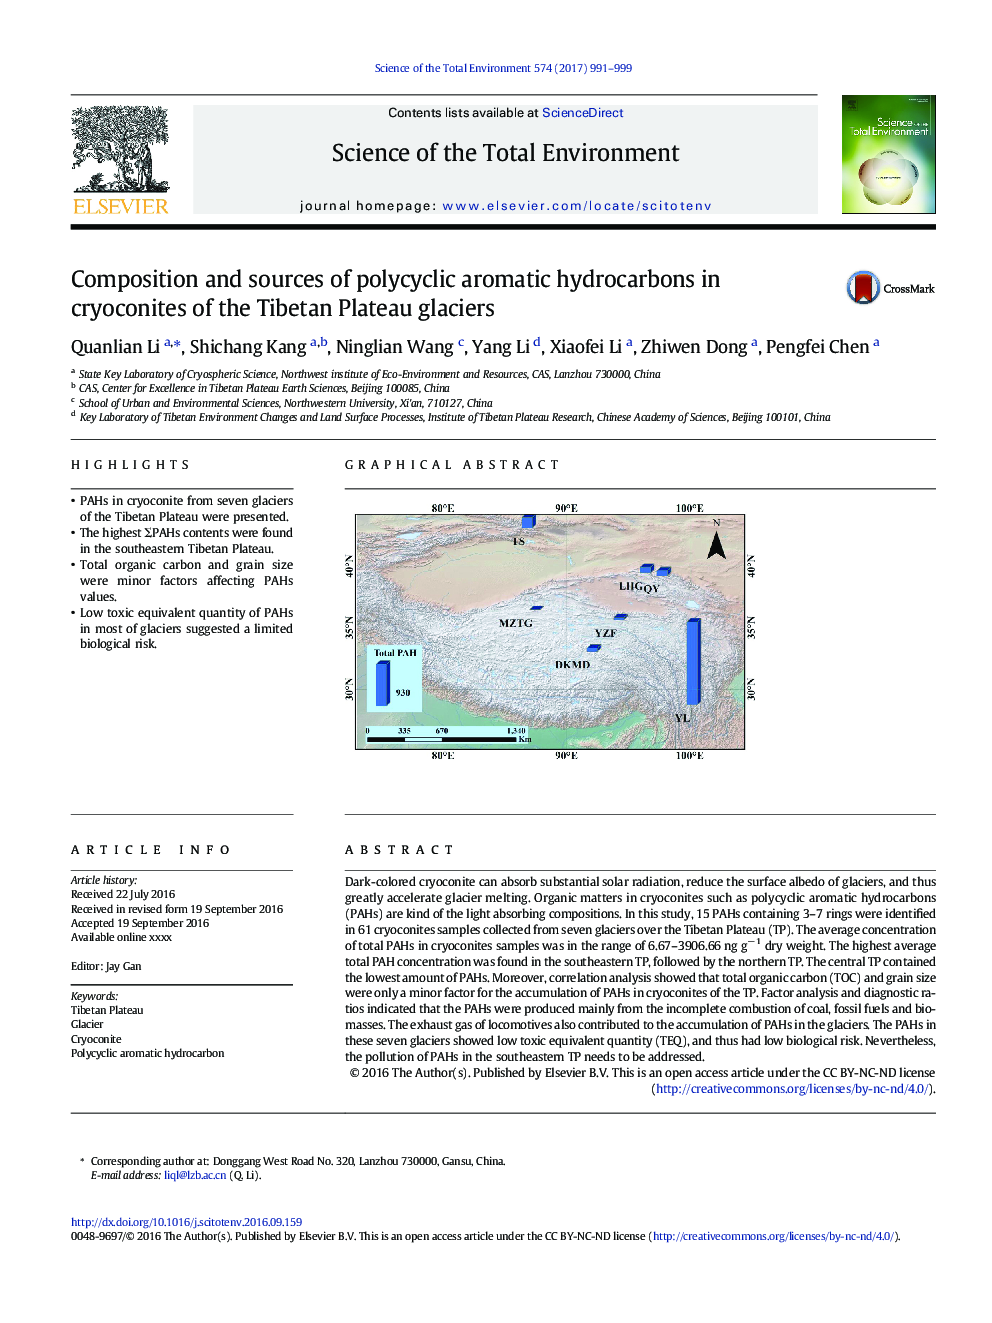 Composition and sources of polycyclic aromatic hydrocarbons in cryoconites of the Tibetan Plateau glaciers